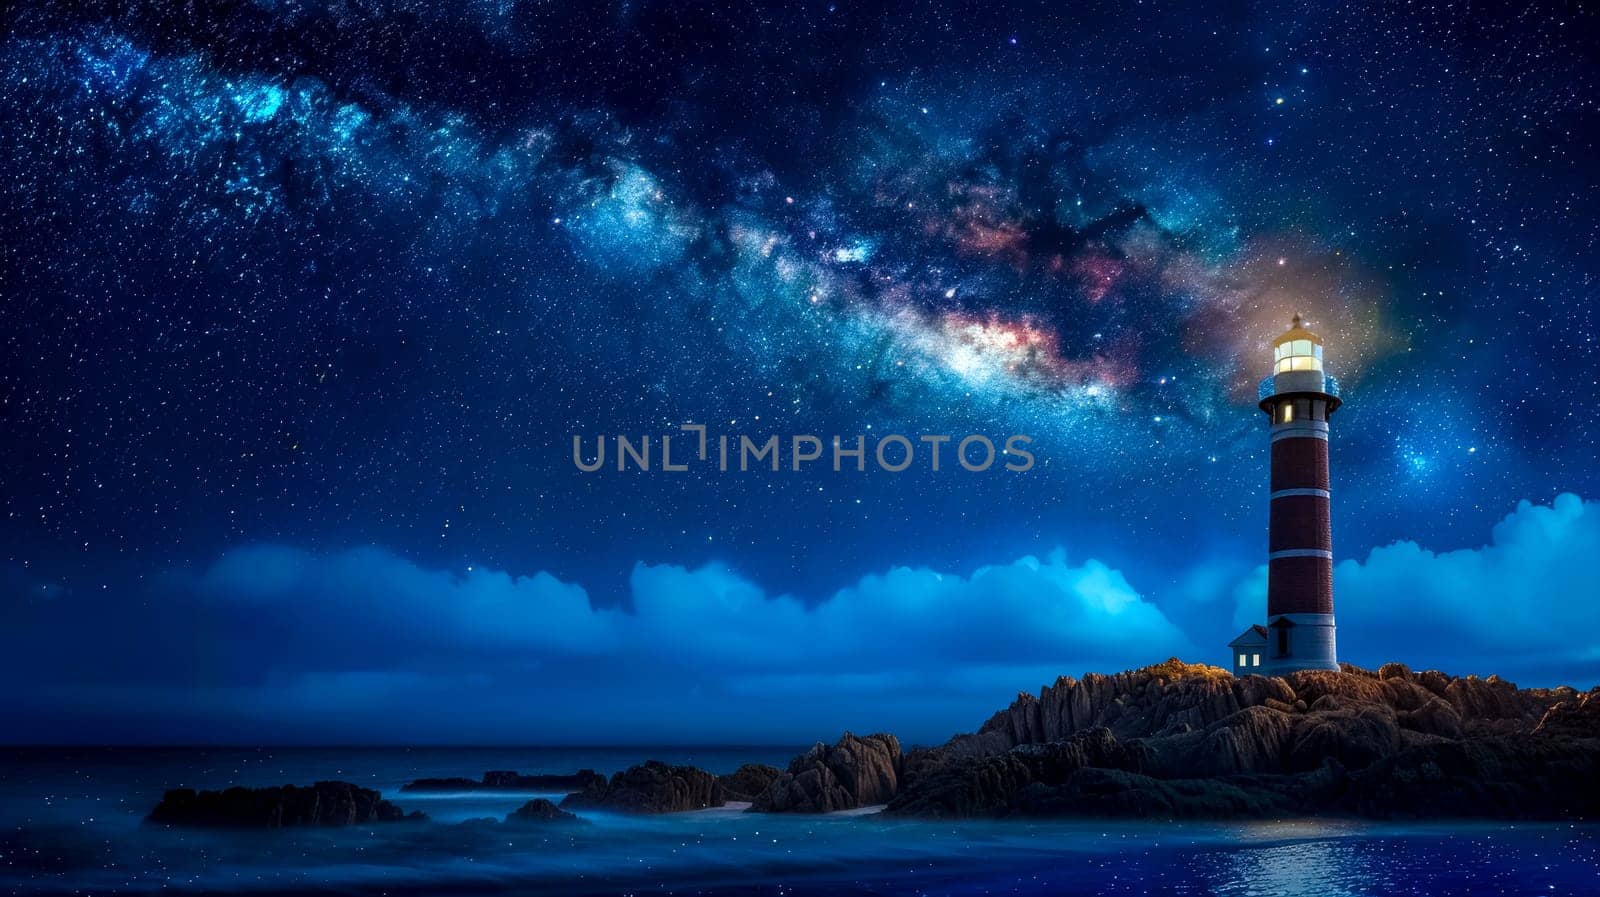 Serene night landscape with a lighthouse illuminated under a vibrant milky way galaxy